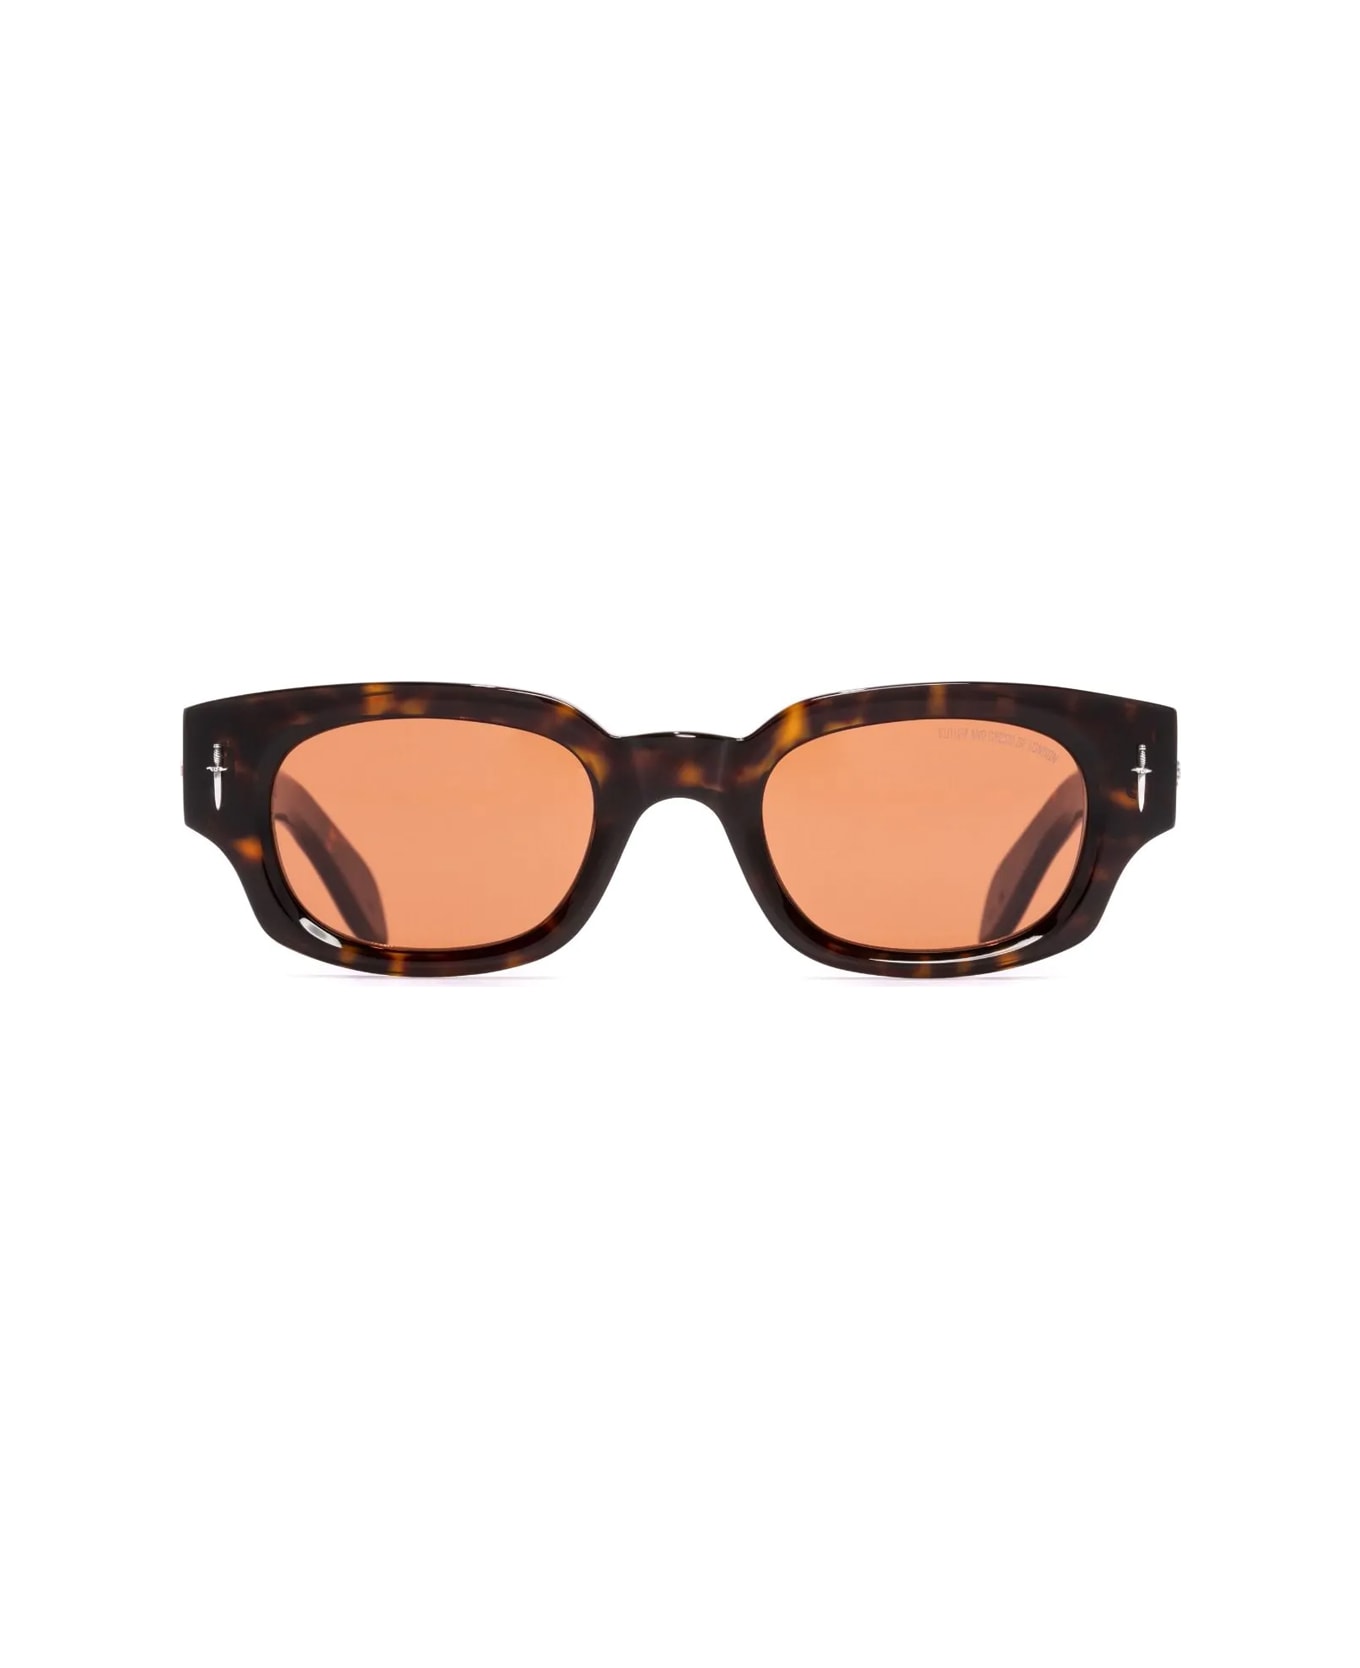 Cutler and Gross Great Frog 004 02 Sunglasses - Marrone